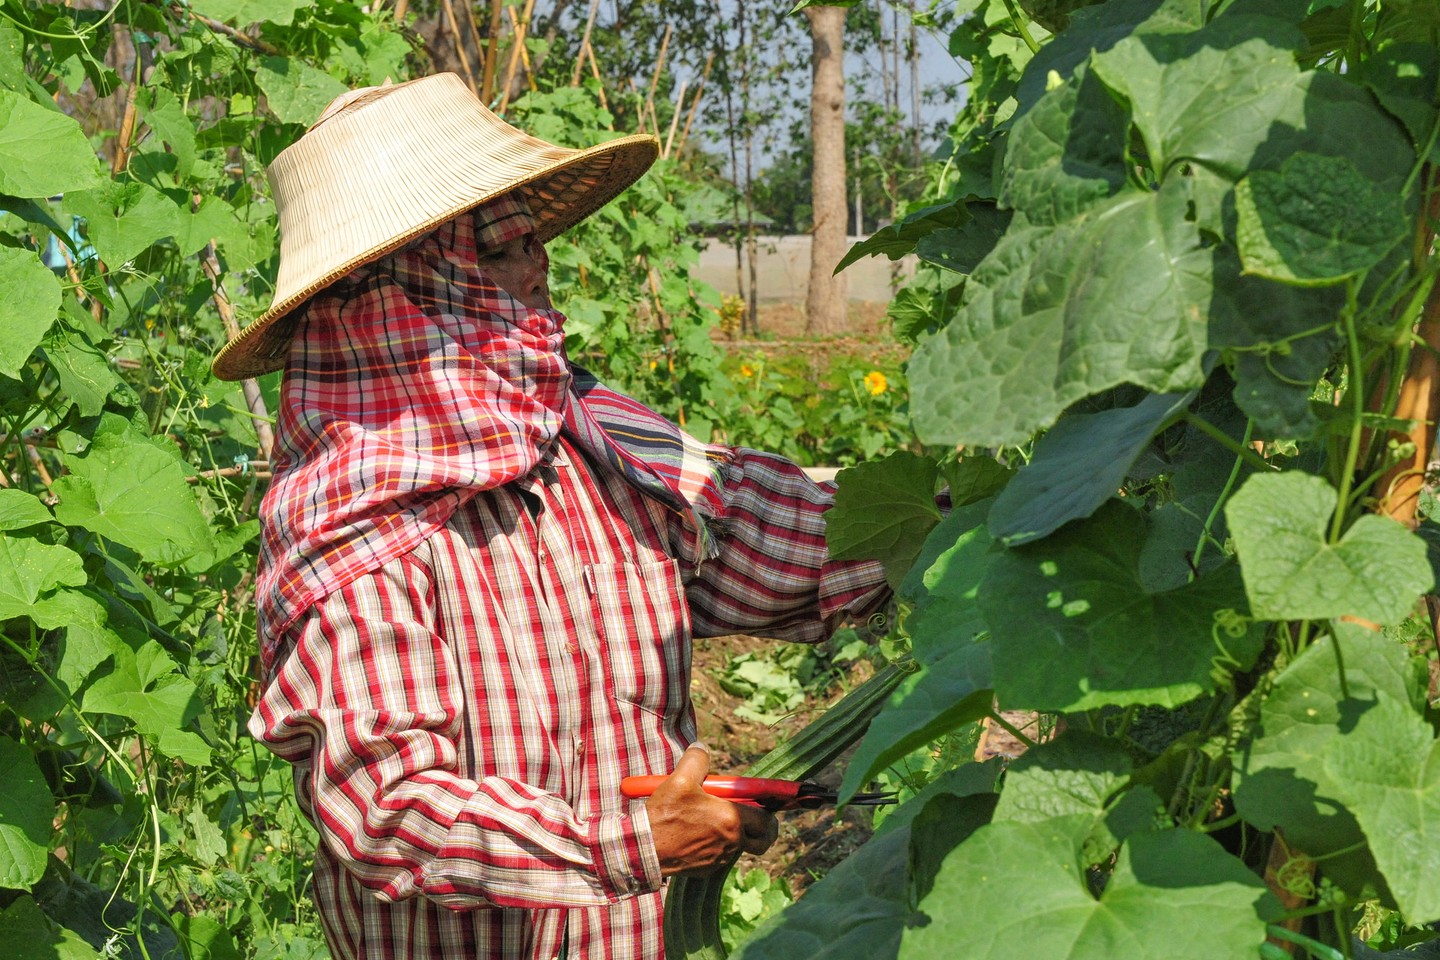 A farmer in the field in Thailand. Agriculture and hunting is the least digitised industry, according to a McKinsey study. Image: USAID U.S. Agency for International Development, CC BY-NC-ND 2.0